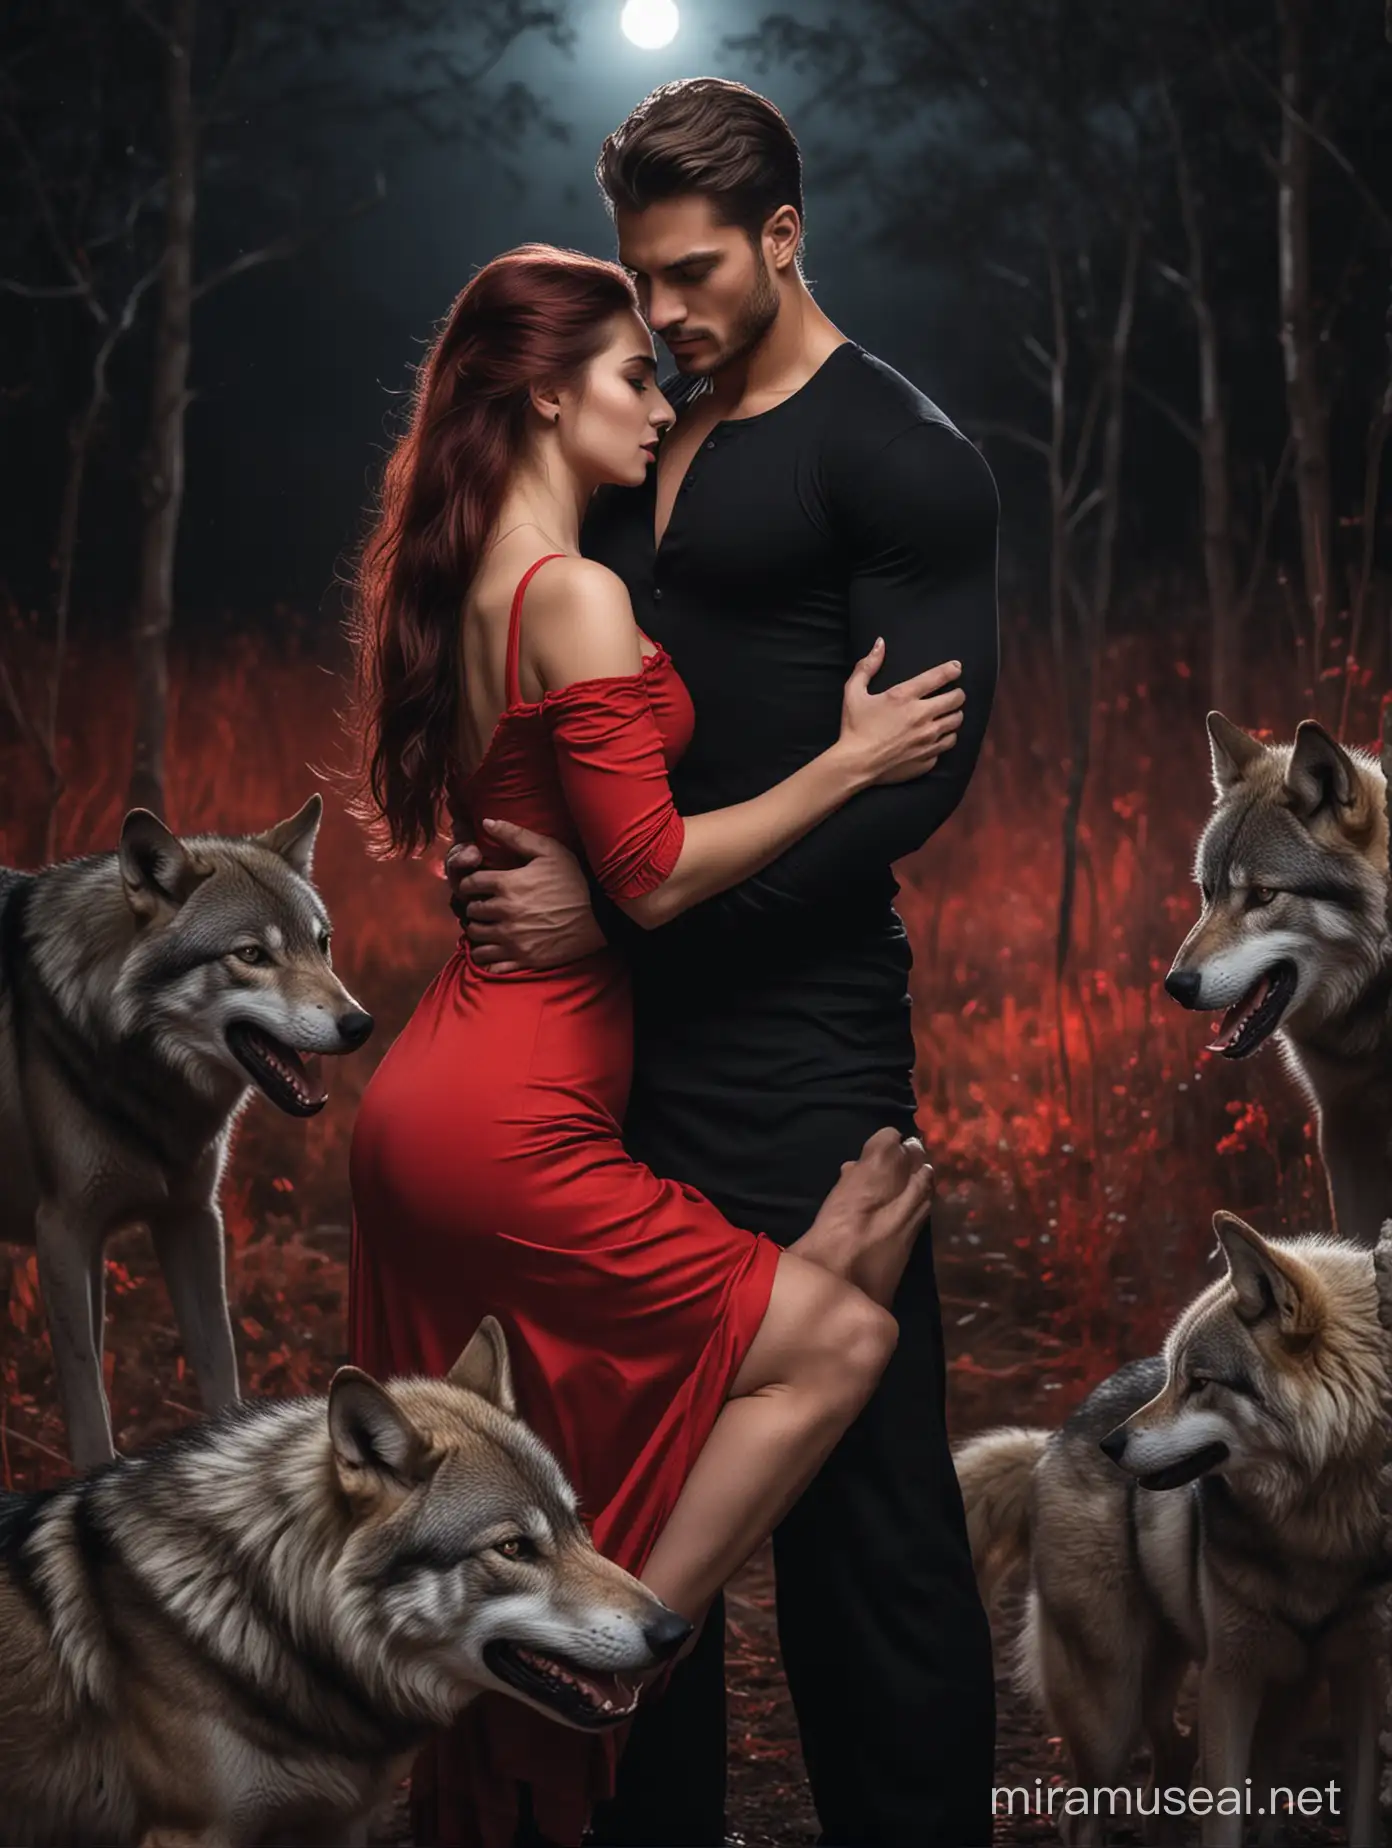 A handsome young man in a cool black tight top to his muscles, holding a lady in red dress romantically, with wolves beside them, at night. 